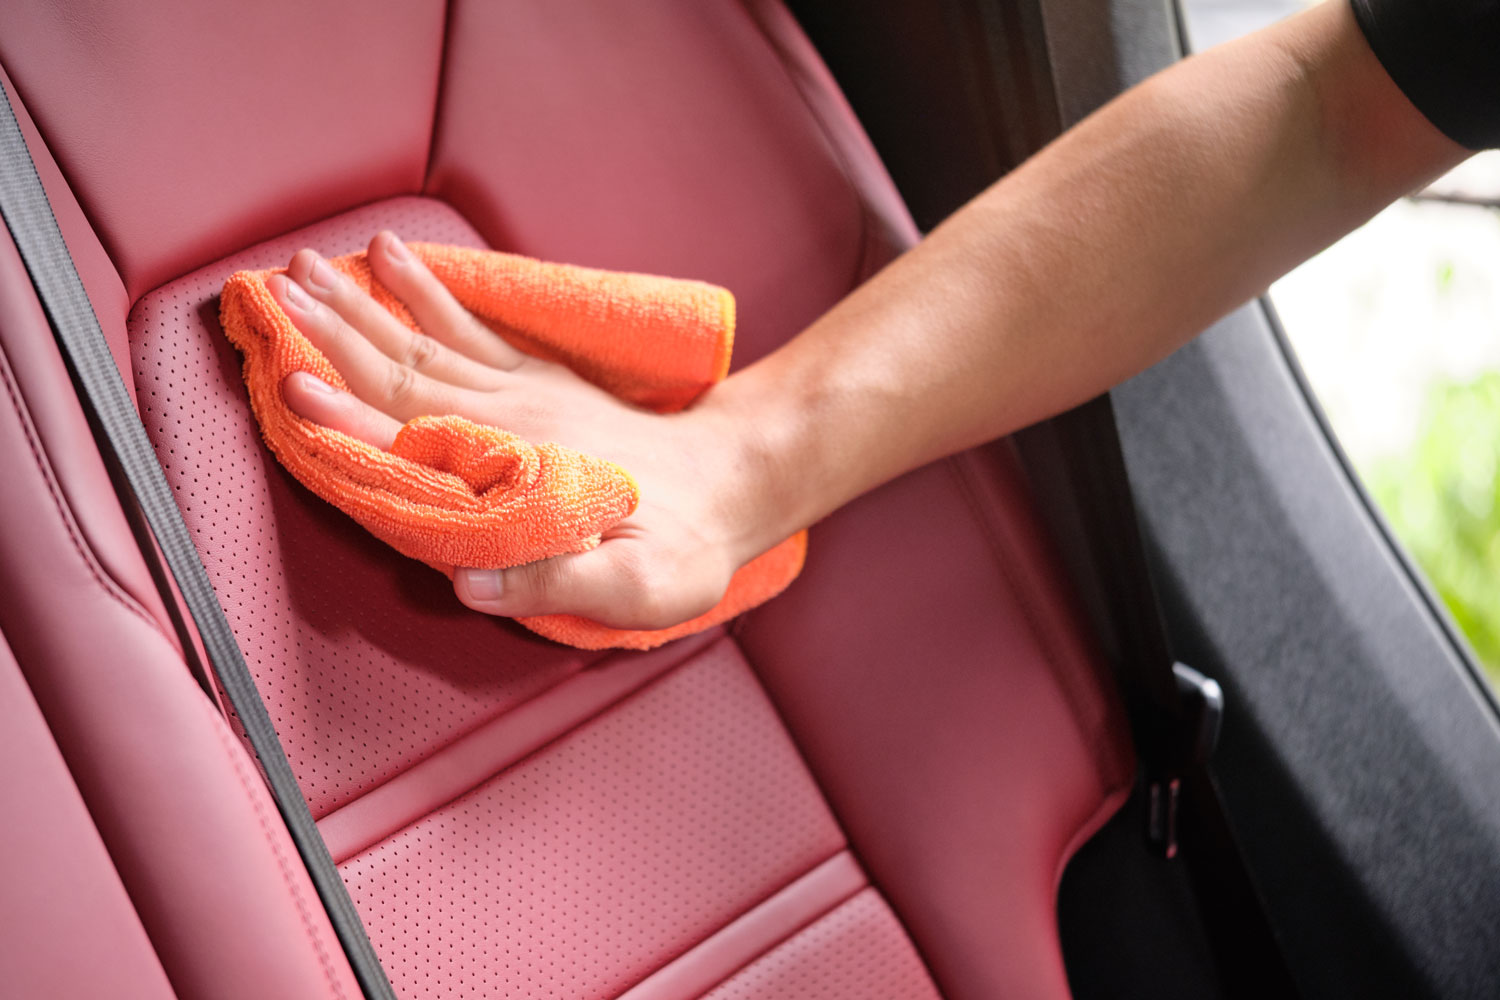 How To Use LEATHER CONDITIONER on Your Car's Leather Seats